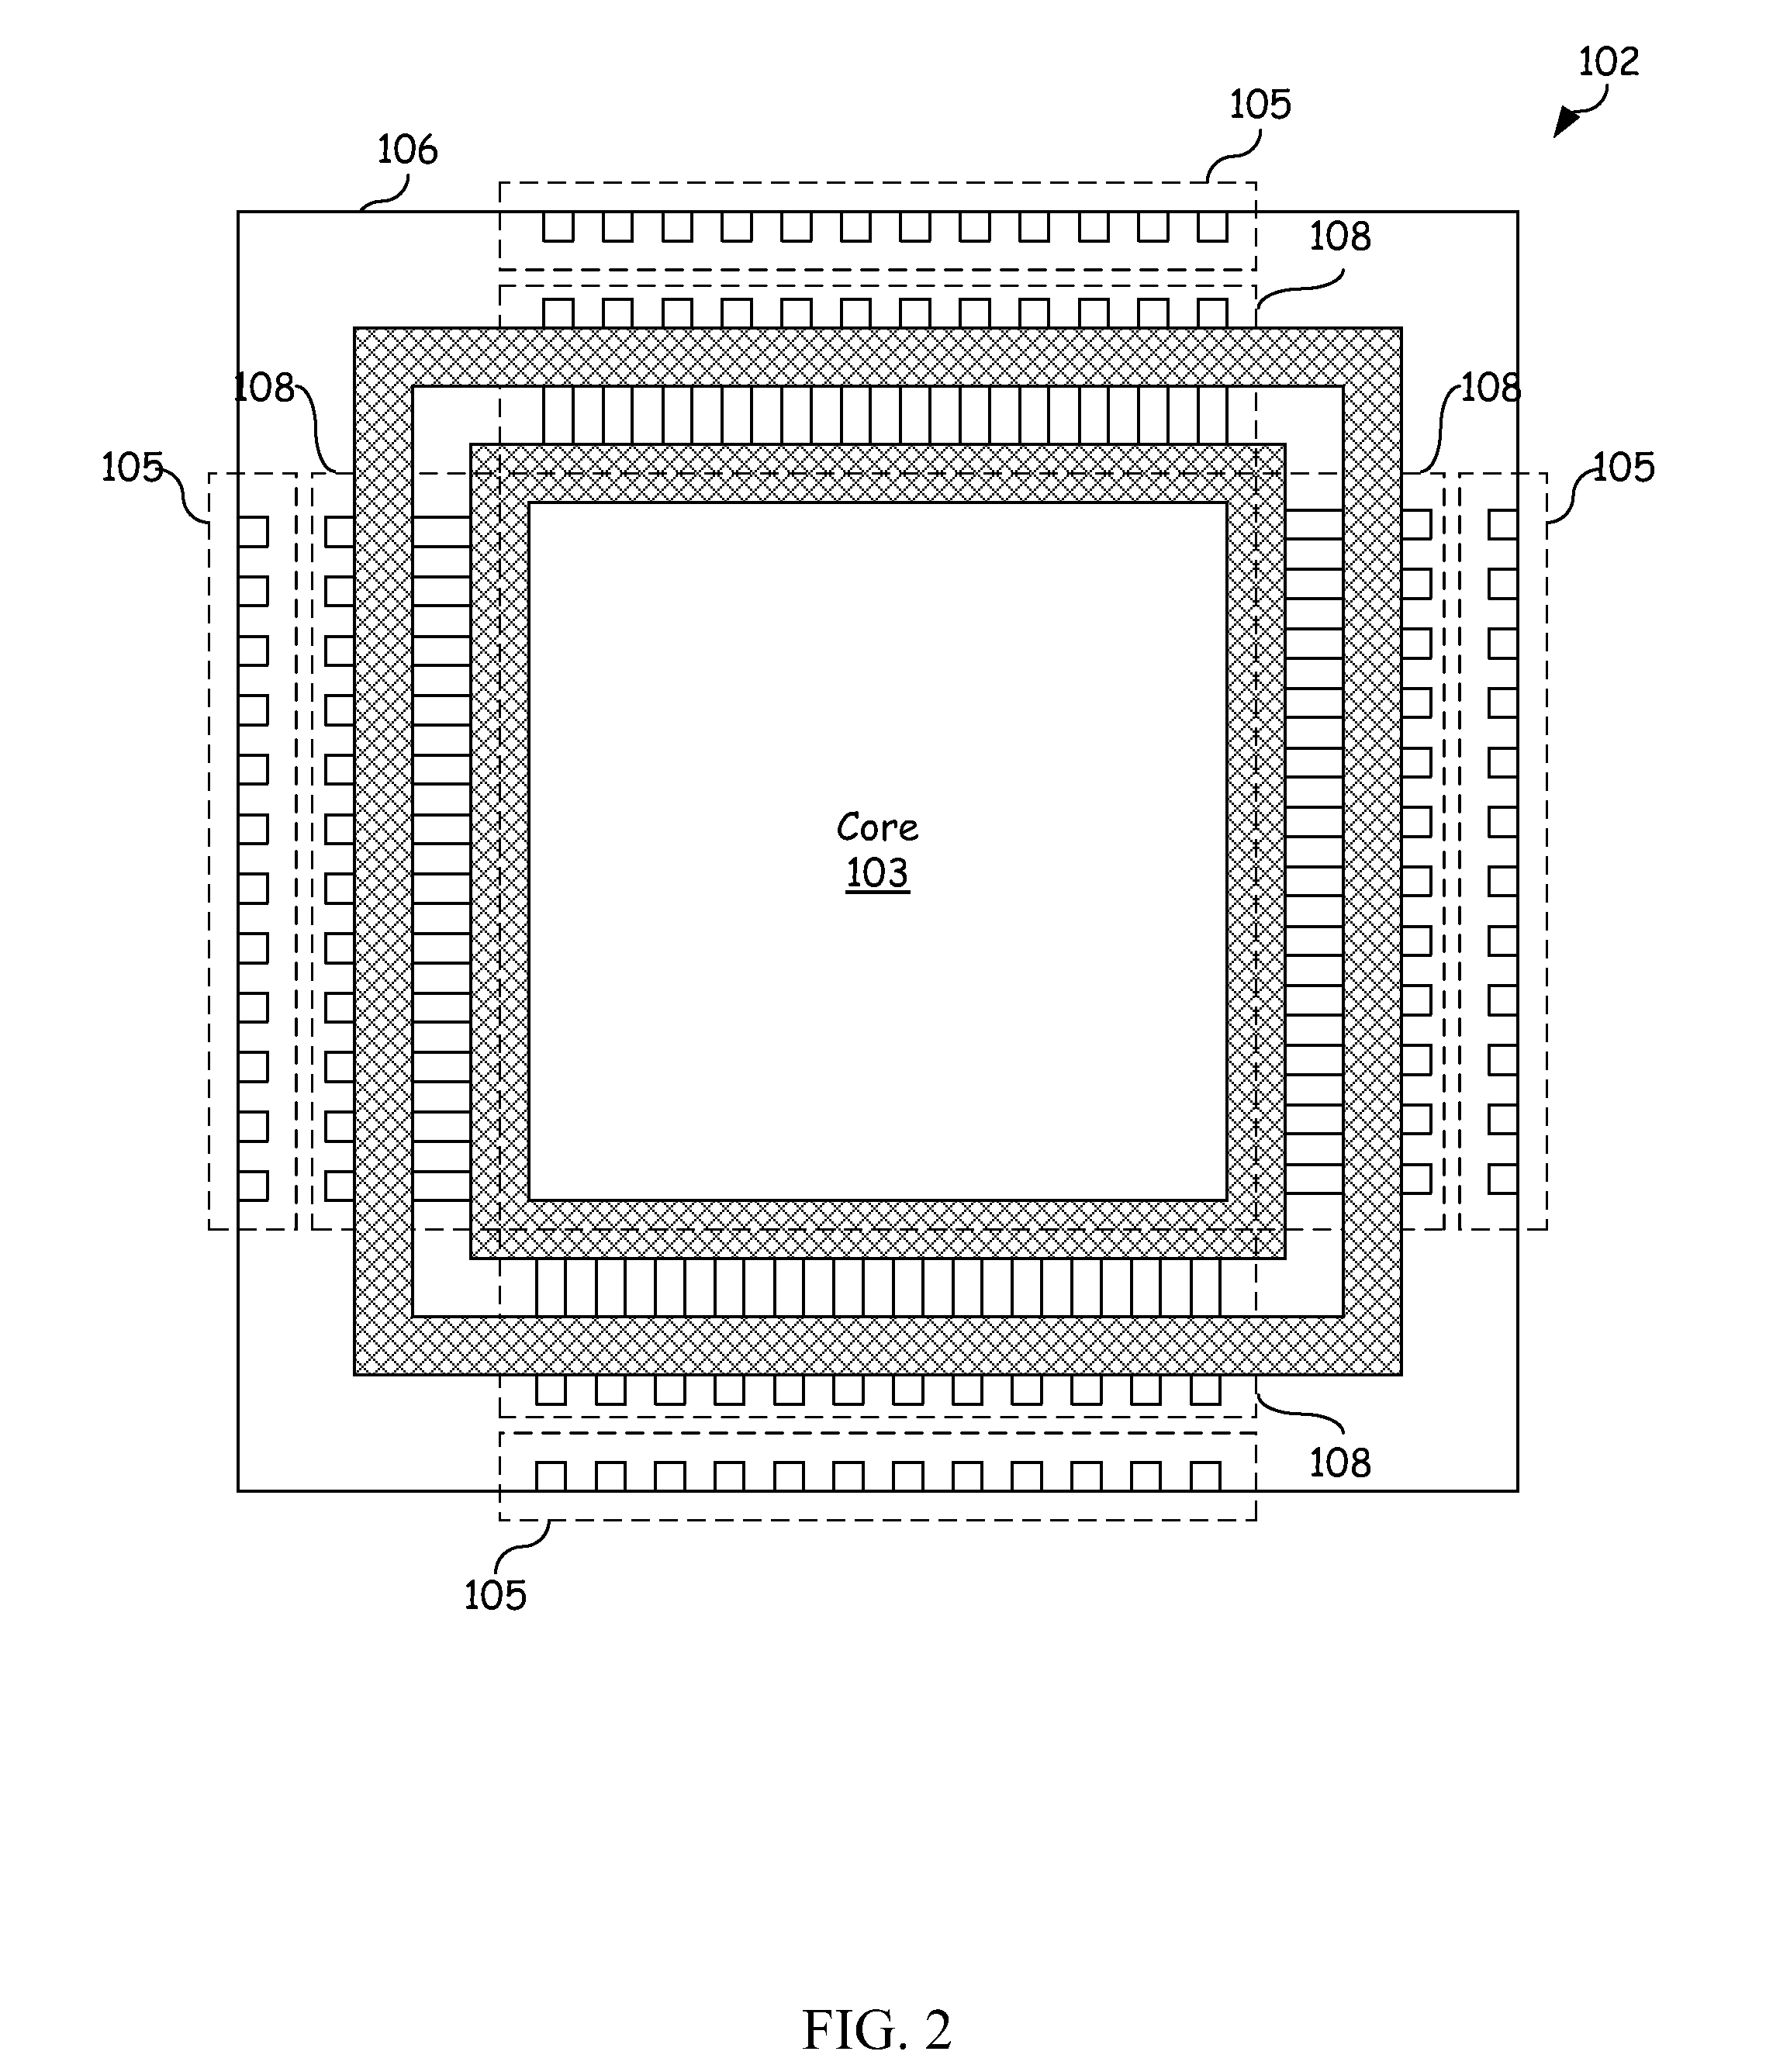 Serial test mode of an integrated circuit (IC)